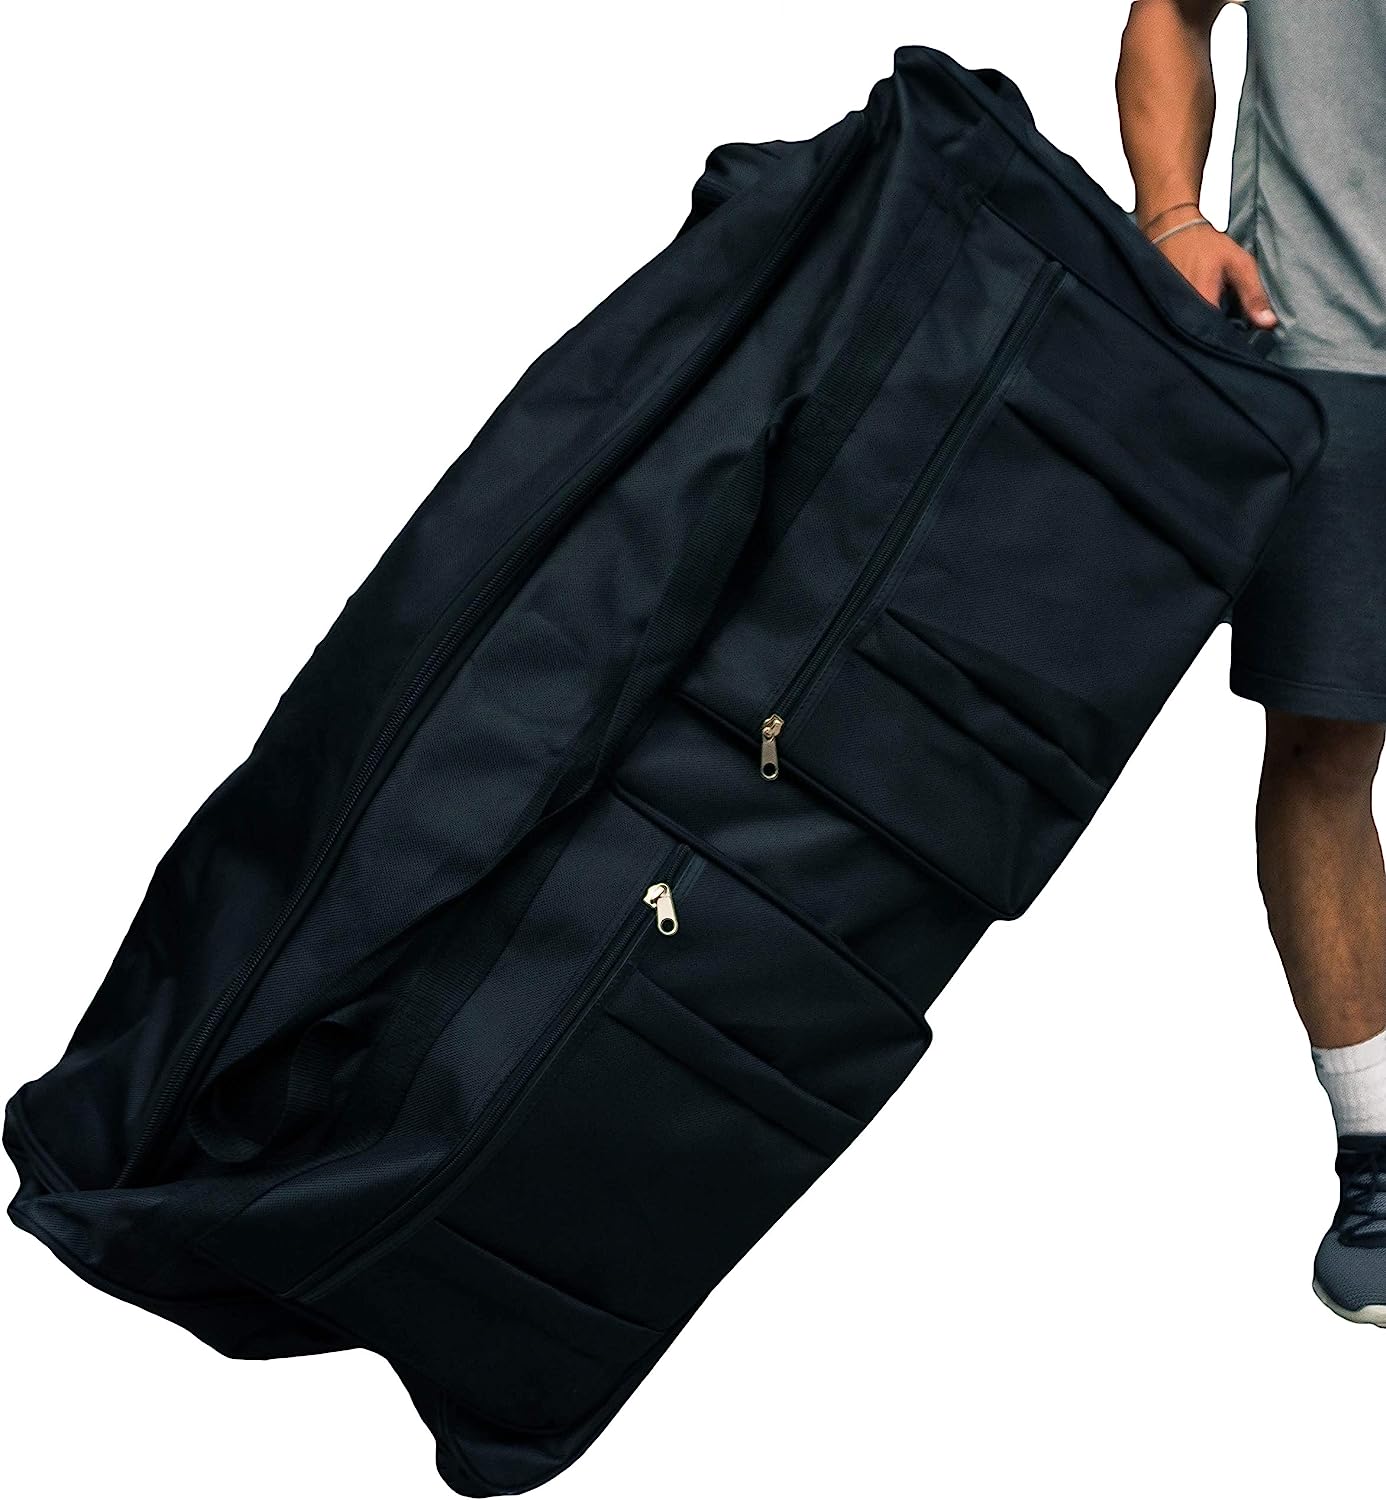 46-inch Rolling Duffle Bag with Wheels, Luggage Bag, Hockey Bag, XL Duffle Bag With Rollers, Heavy Duty Oversized Storage Bag